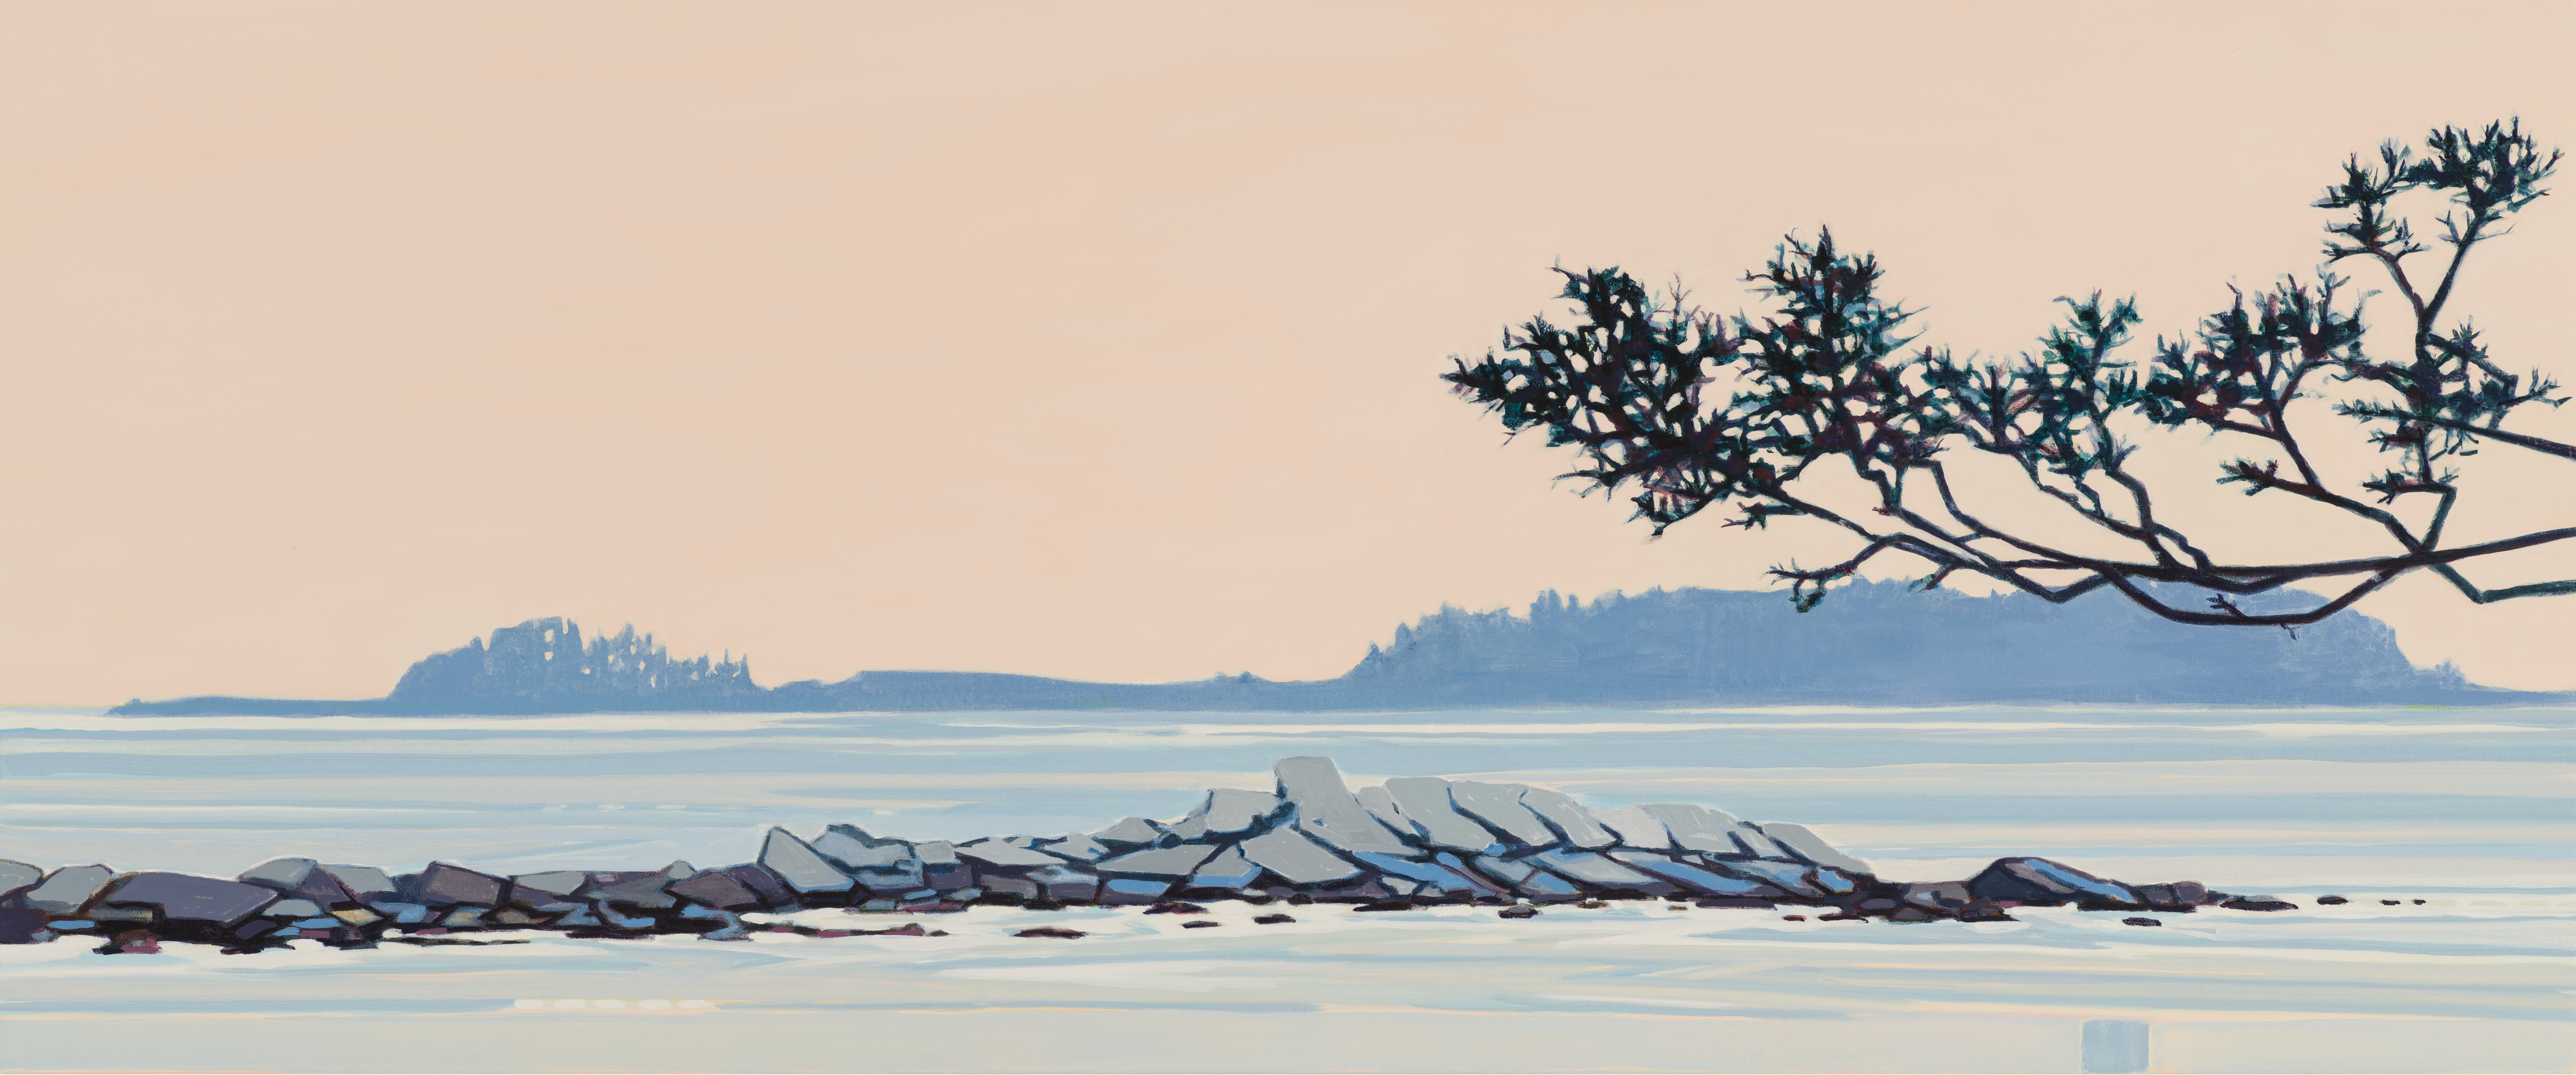 Harmon Morning, 8/9/20, 06:45, 43.535563, -70.314313, 2021, oil on canvas, 15 x 36 inches